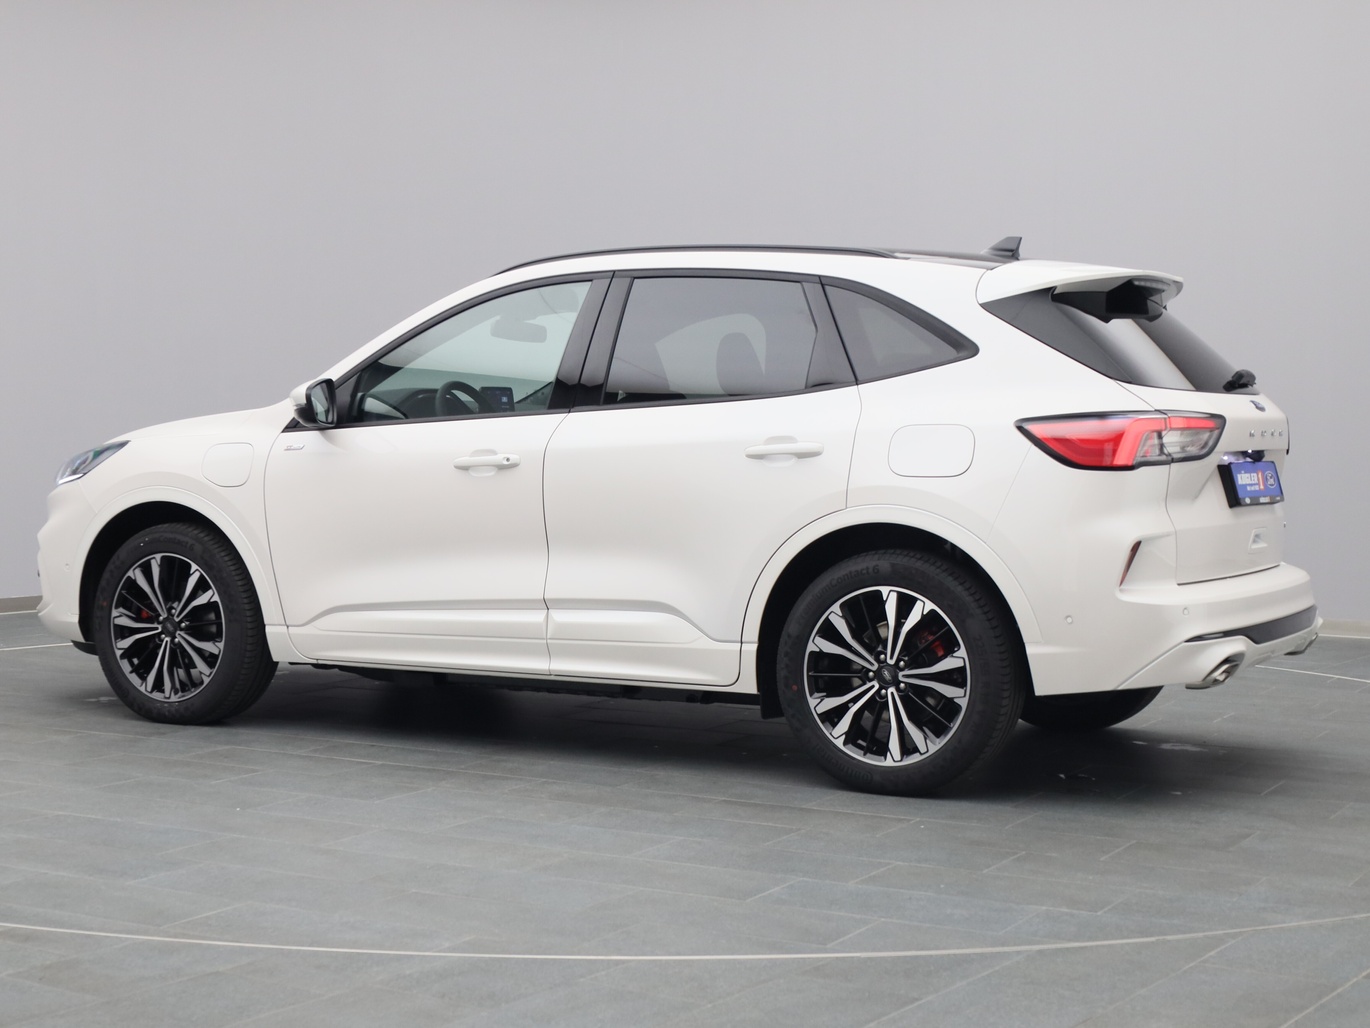  Ford Kuga ST-Line X 225PS Plug-in-Hybrid Aut. in Weiss 